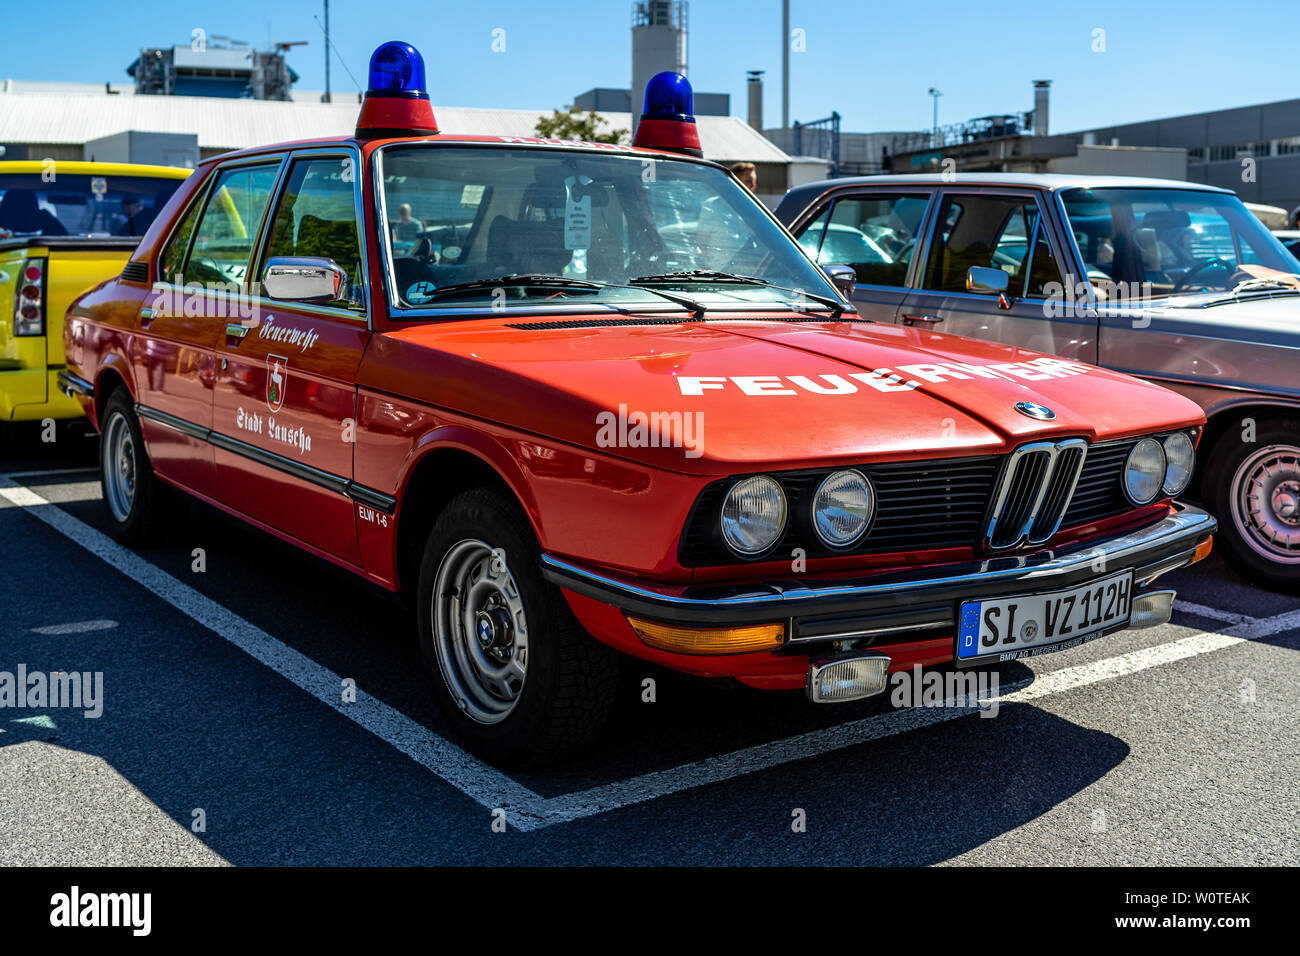 BERLIN - MAY 06, 2018: Executive car BMW 520/6 (E12) 1977, in the color of the duty car of the fire department. Oldtimertage Berlin-Brandenburg (31th Berlin-Brandenburg Oldtimer Day). Stock Photo